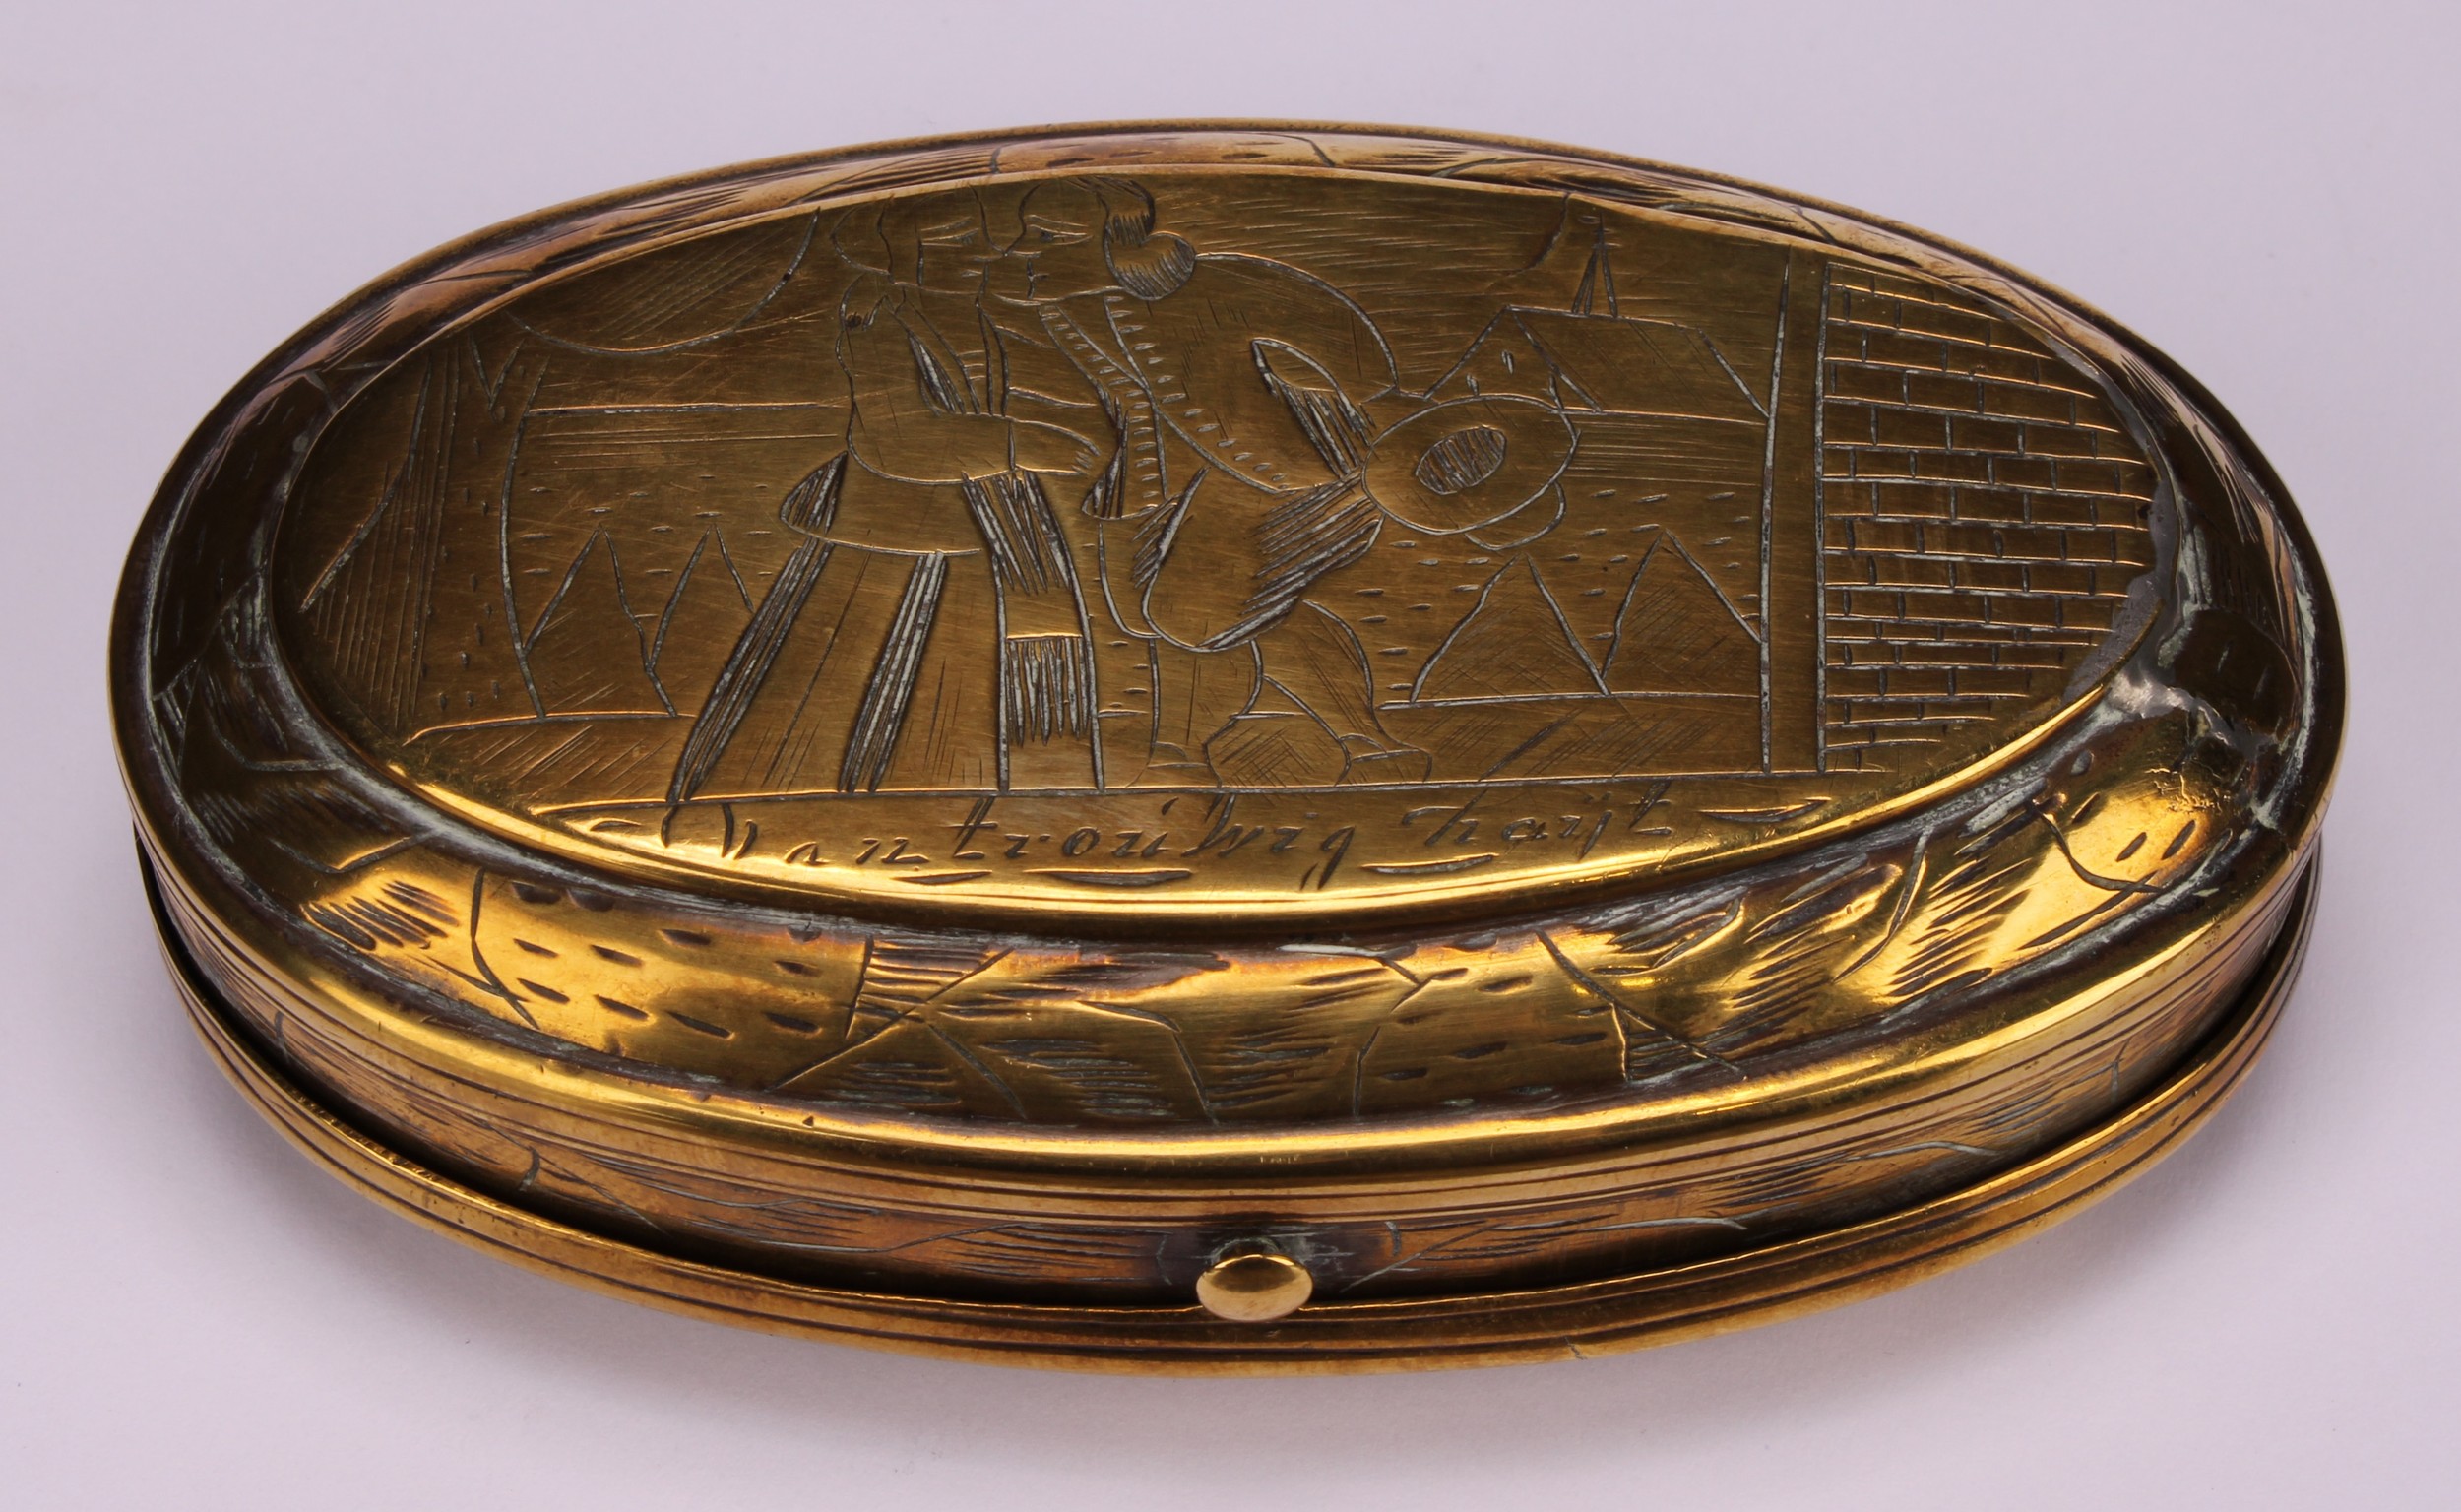 An early 18th century Dutch brass oval tobacco box, engraved with narrative scenes, hinged cover - Image 3 of 6